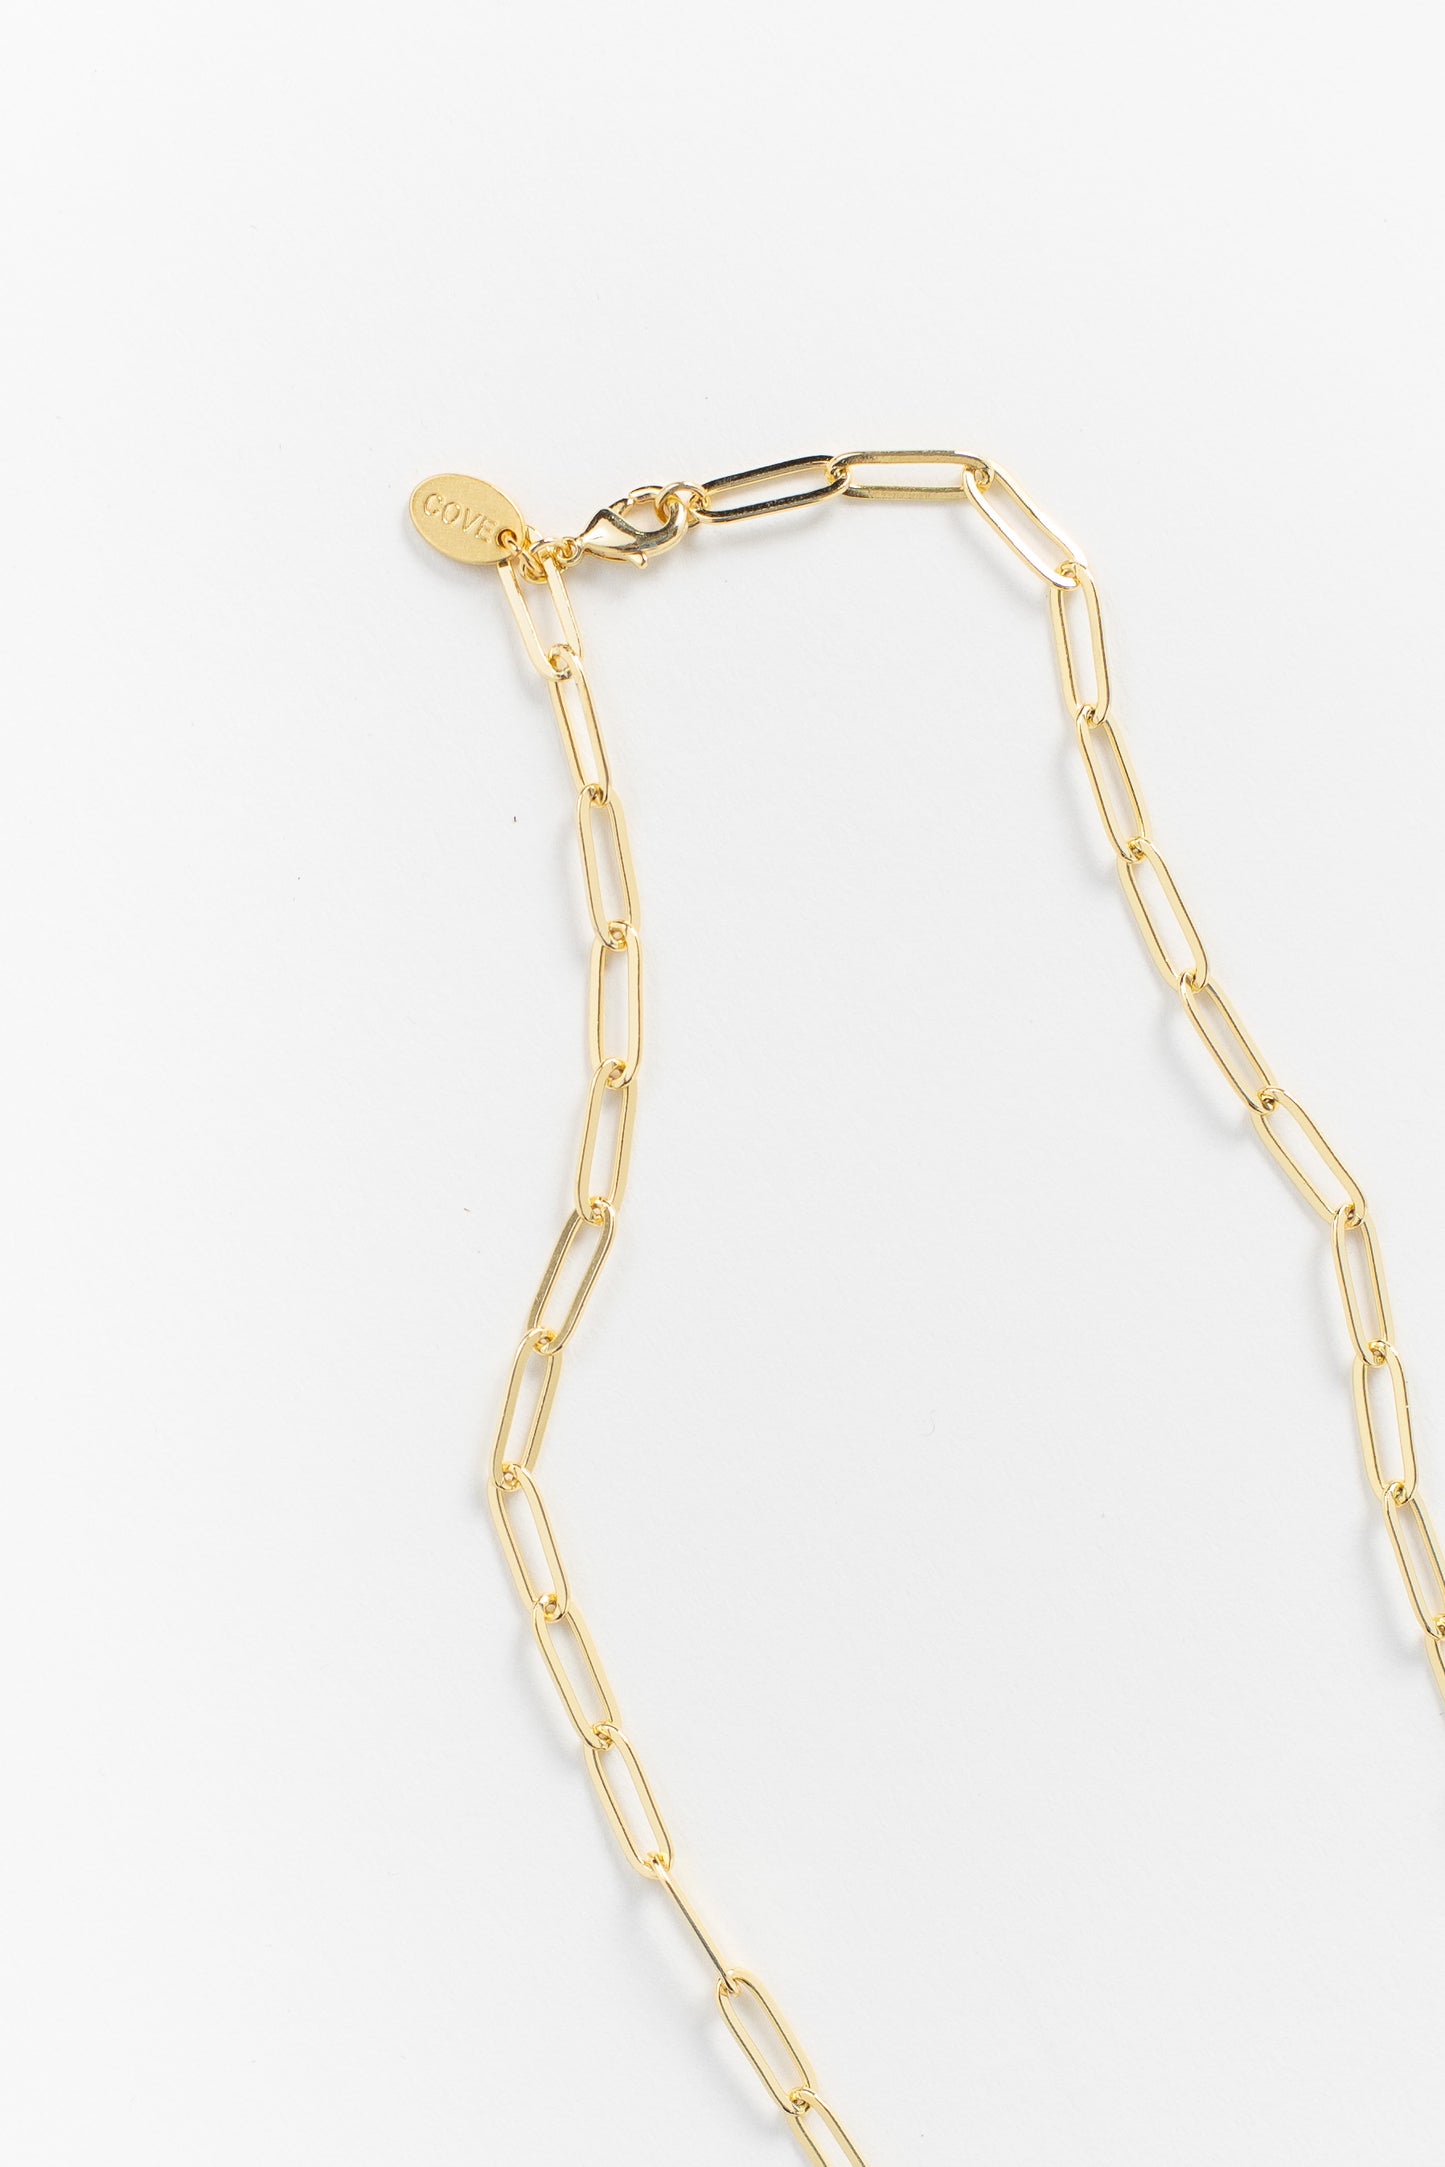 Gold Paperclip Chain 16"